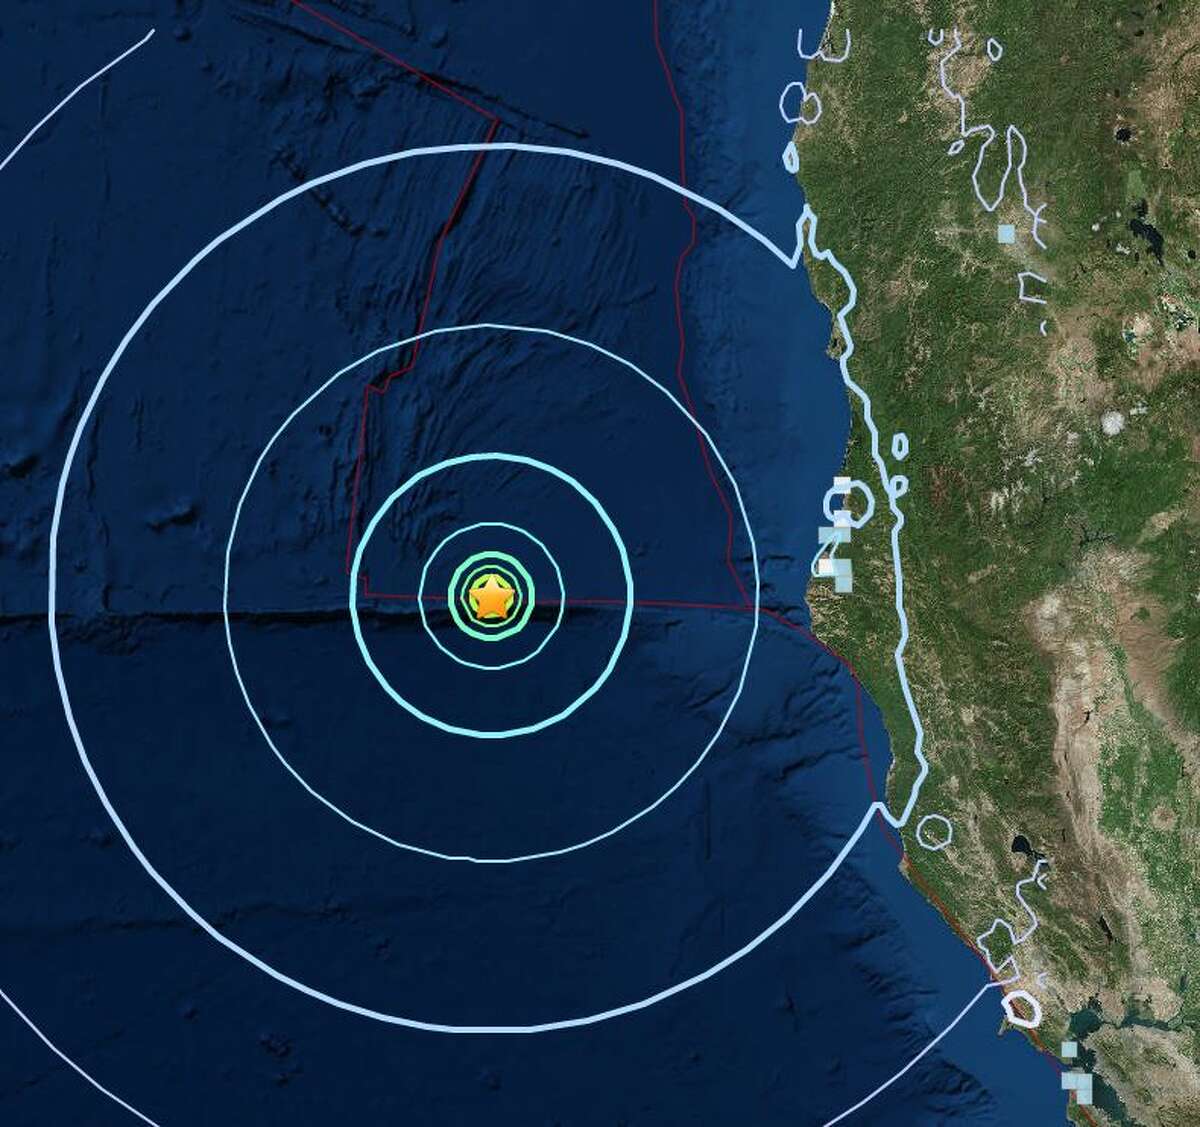 A USGS intensity map suggests people on land may have been able to feel Friday's quake.